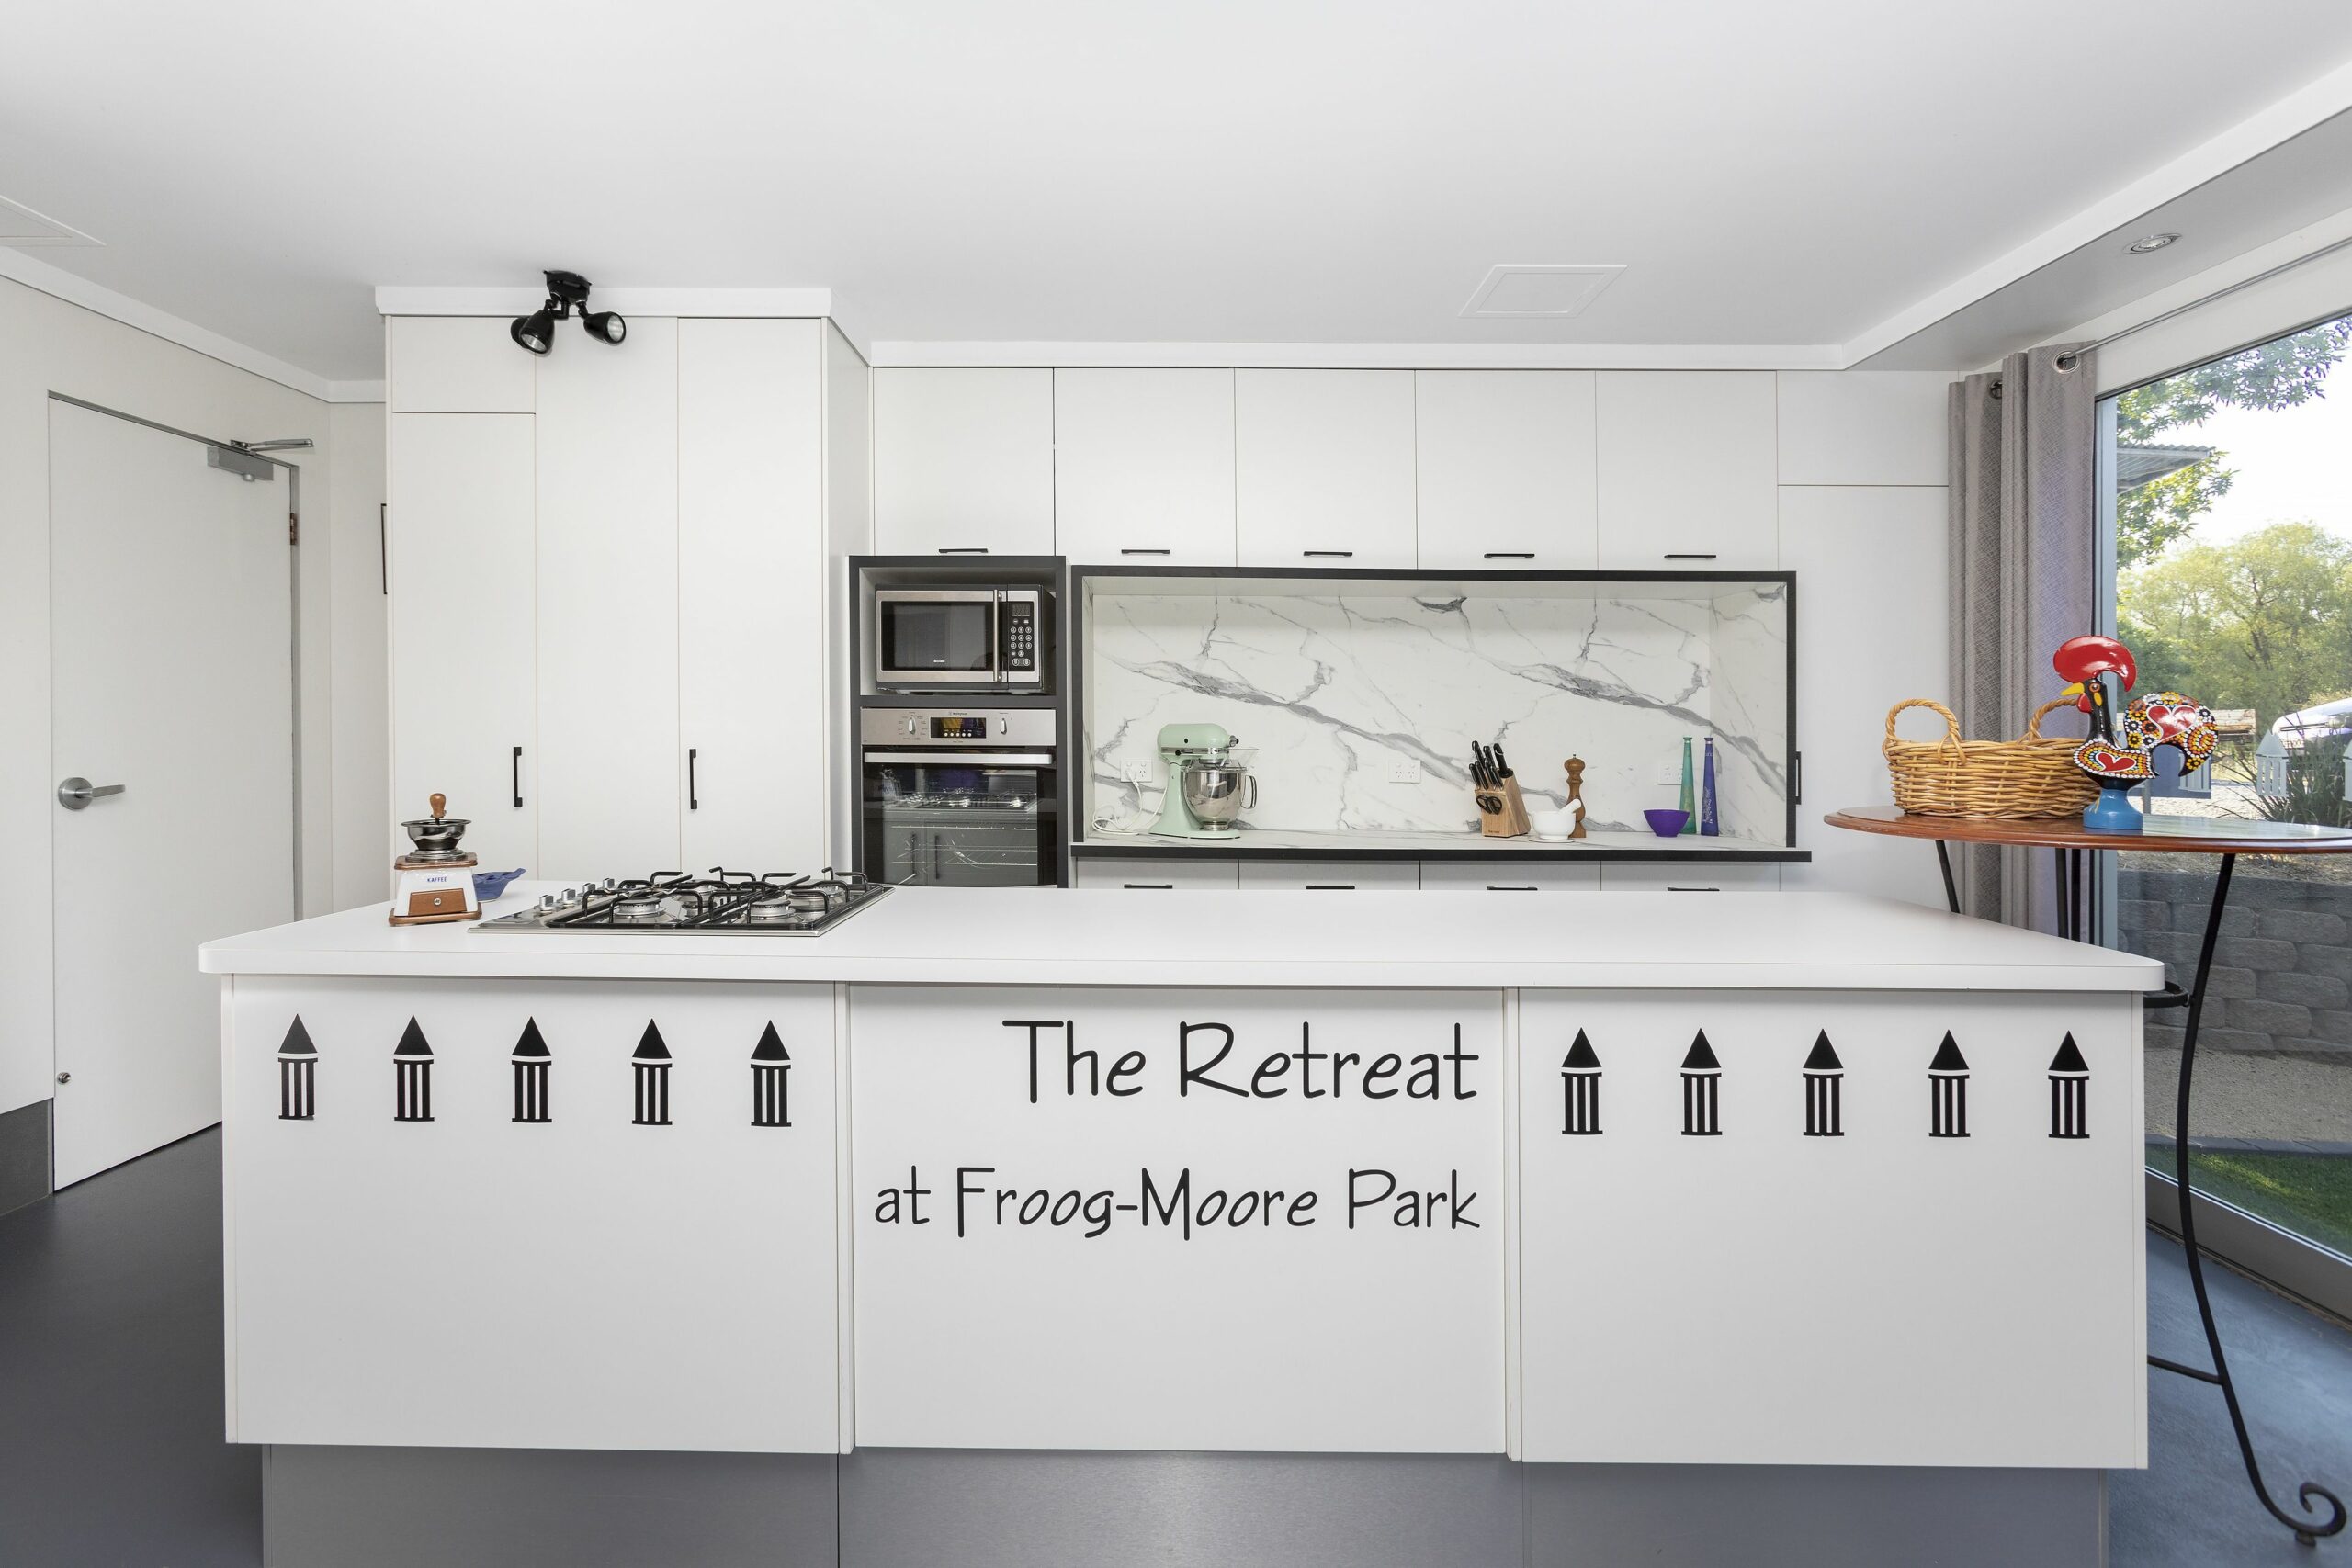 The Retreat at Froog-Moore Park